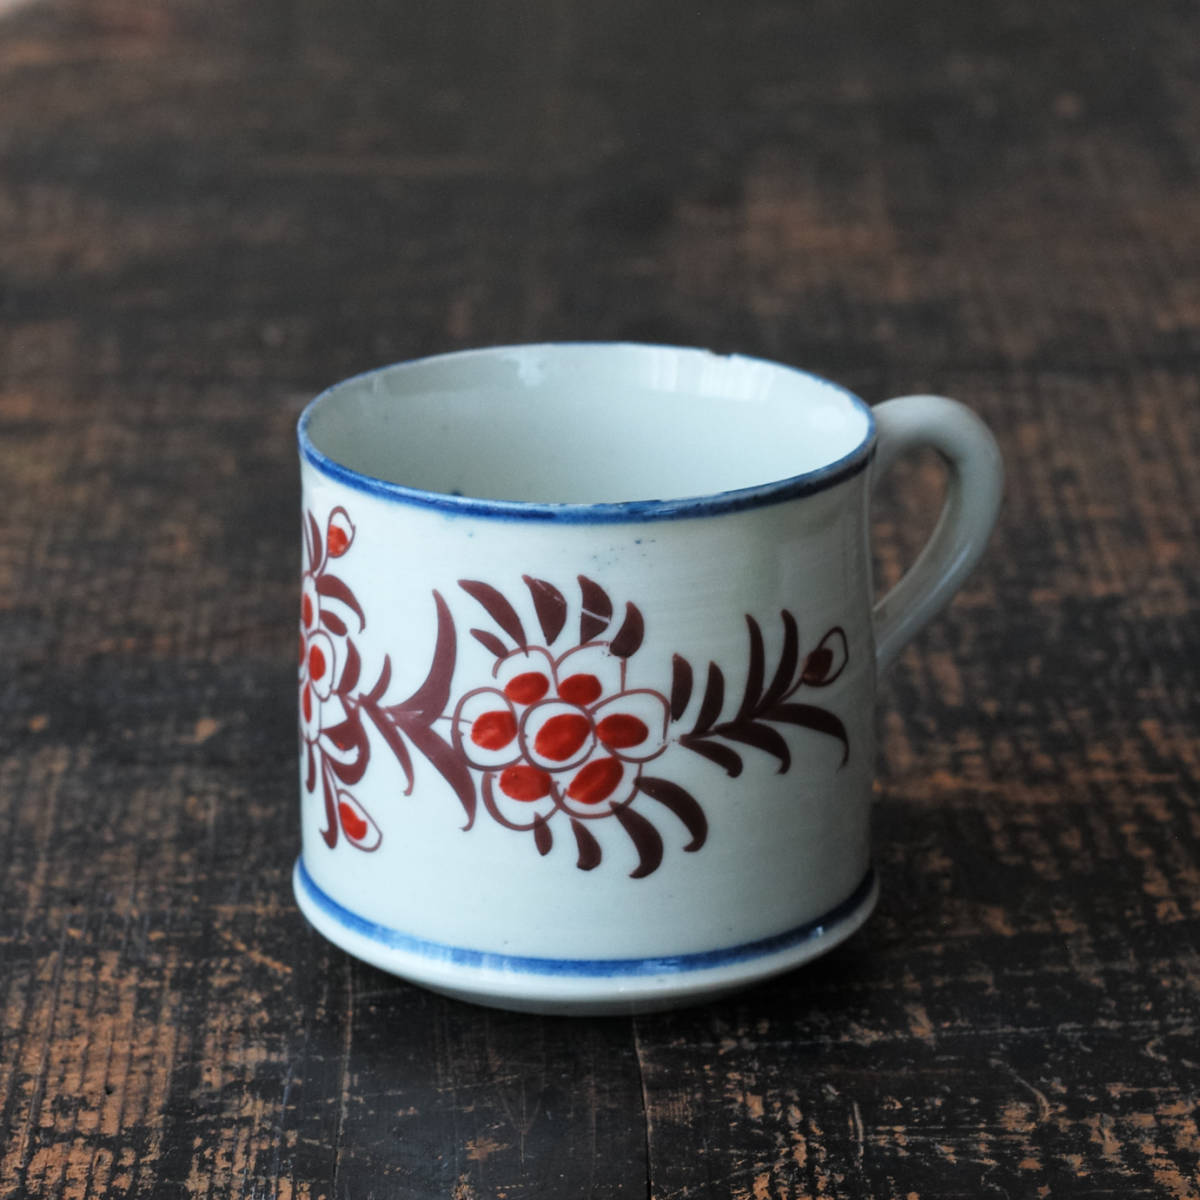  wave . see . Japan most old. mug Edo era curtain end / antique blue and white ceramics red .. flower writing comp la bin old Imari coffee cup ... Dell fto